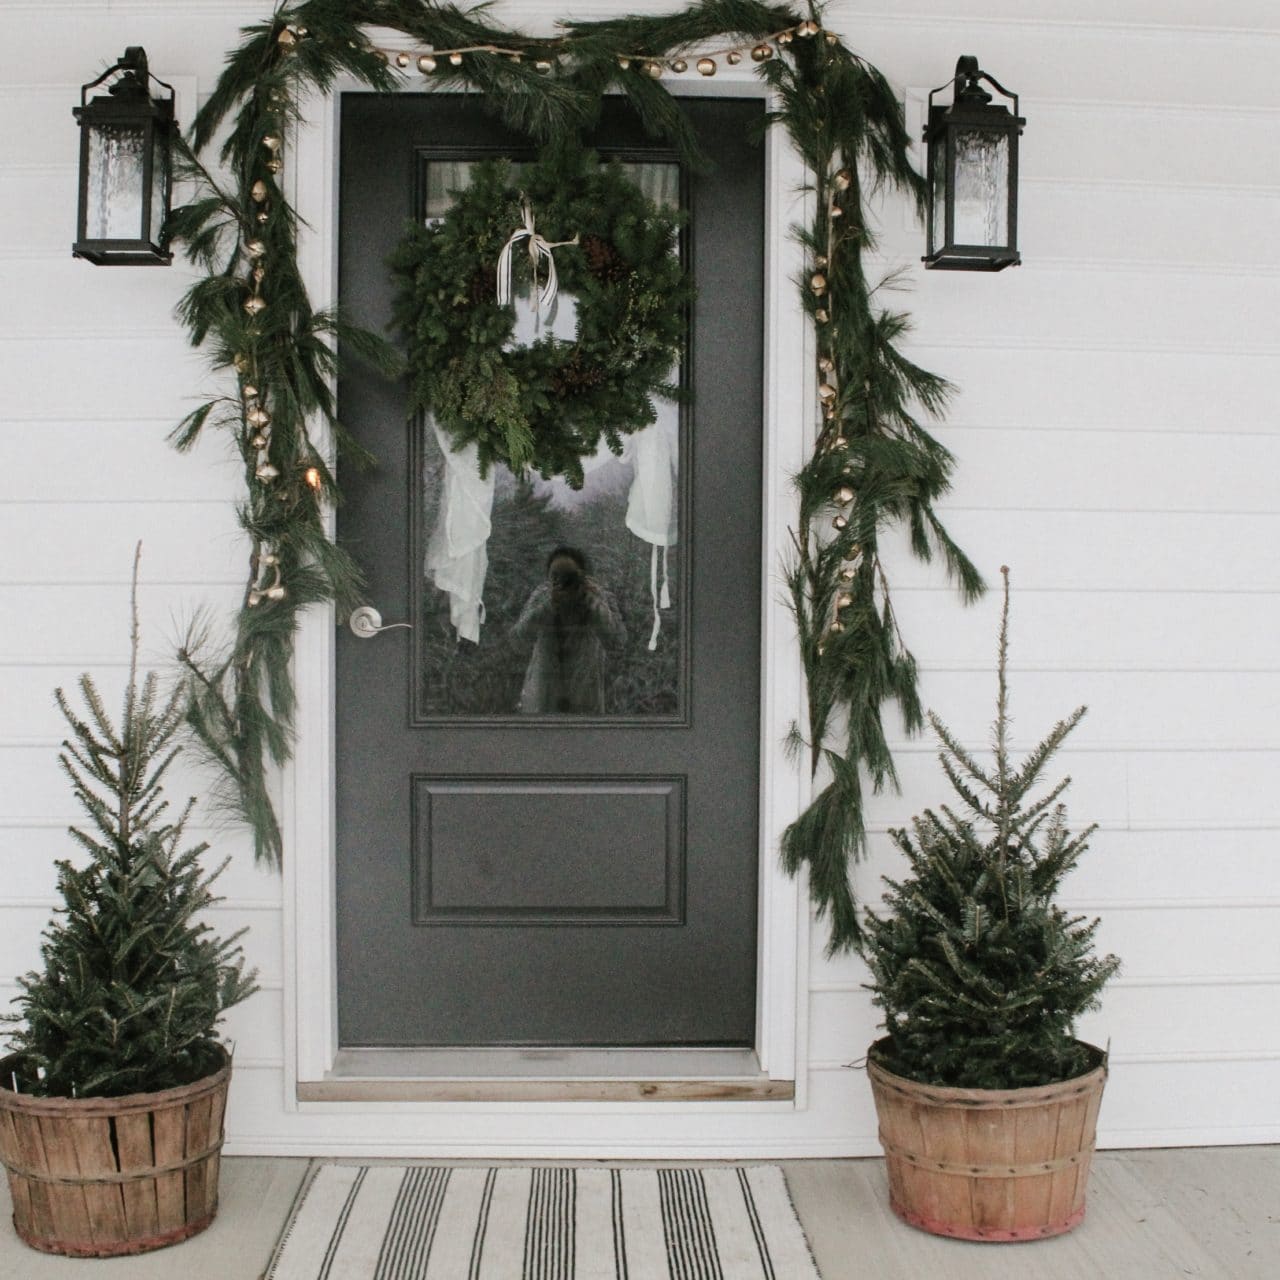 Festive Winter Porch Decorated with Jingle Bells and Pine